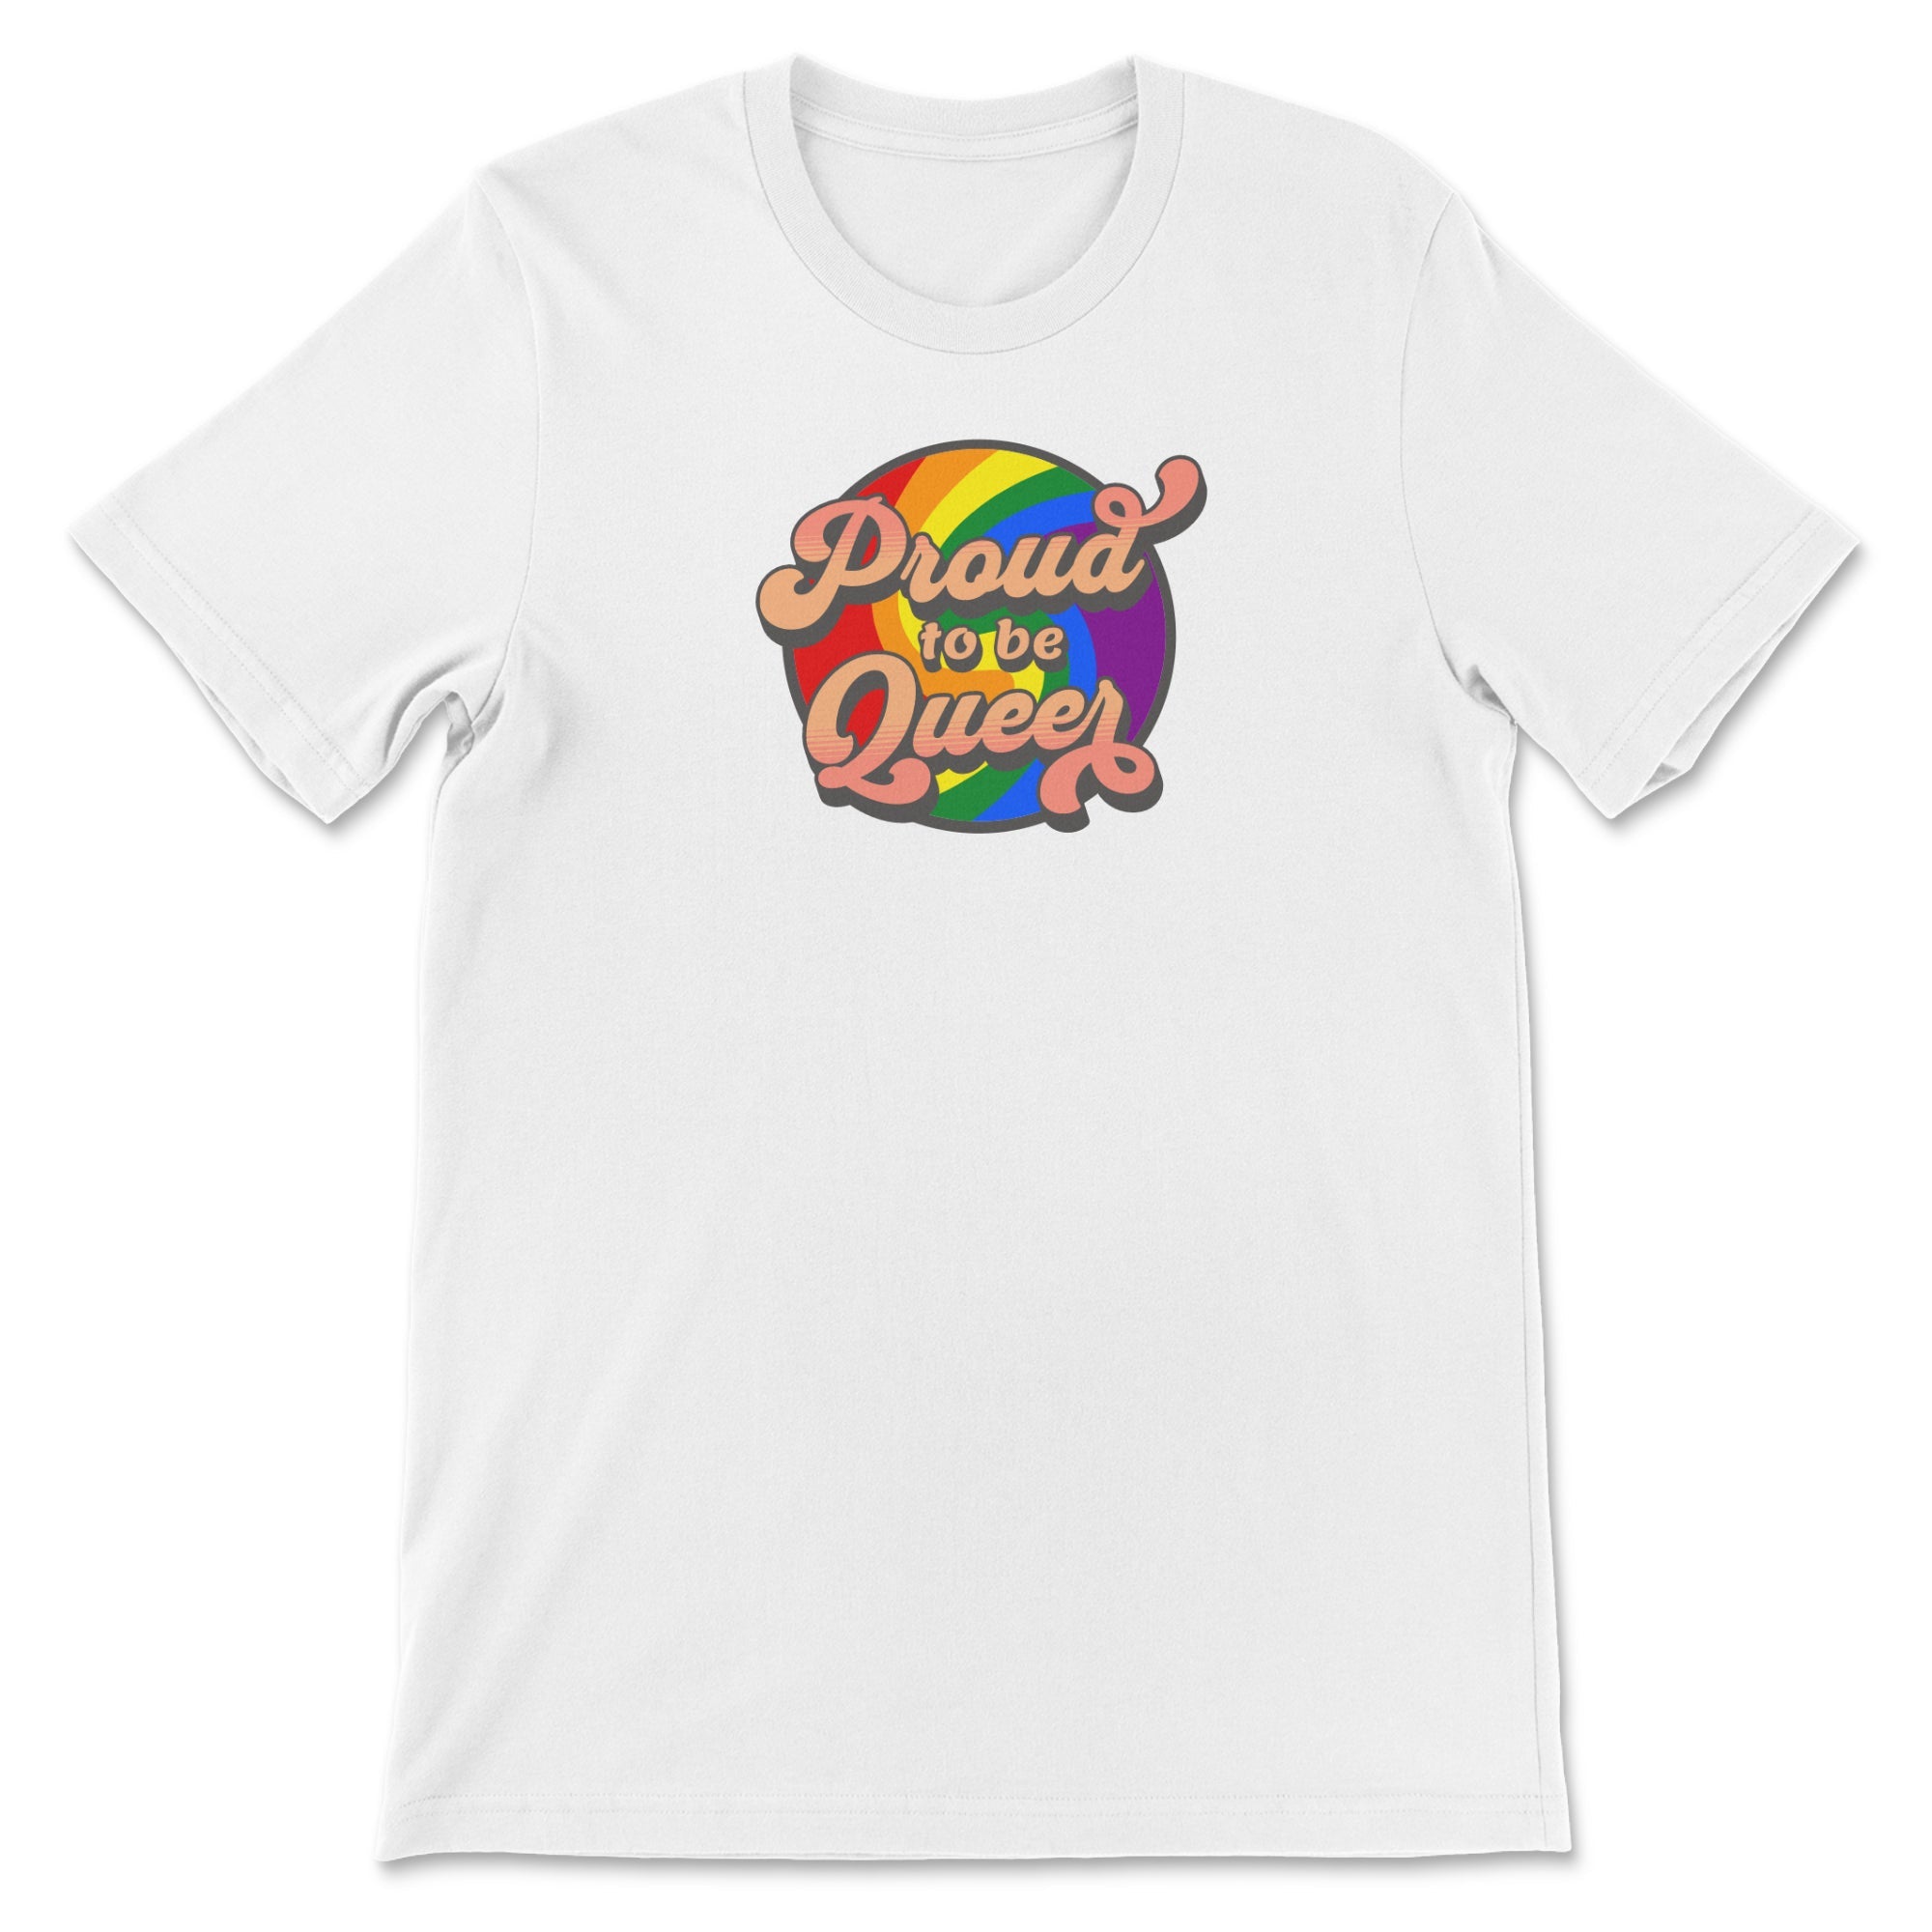 Retro "Proud to be Queer" T-Shirt - Vintage Pride Statement - Hunky Tops#color_white